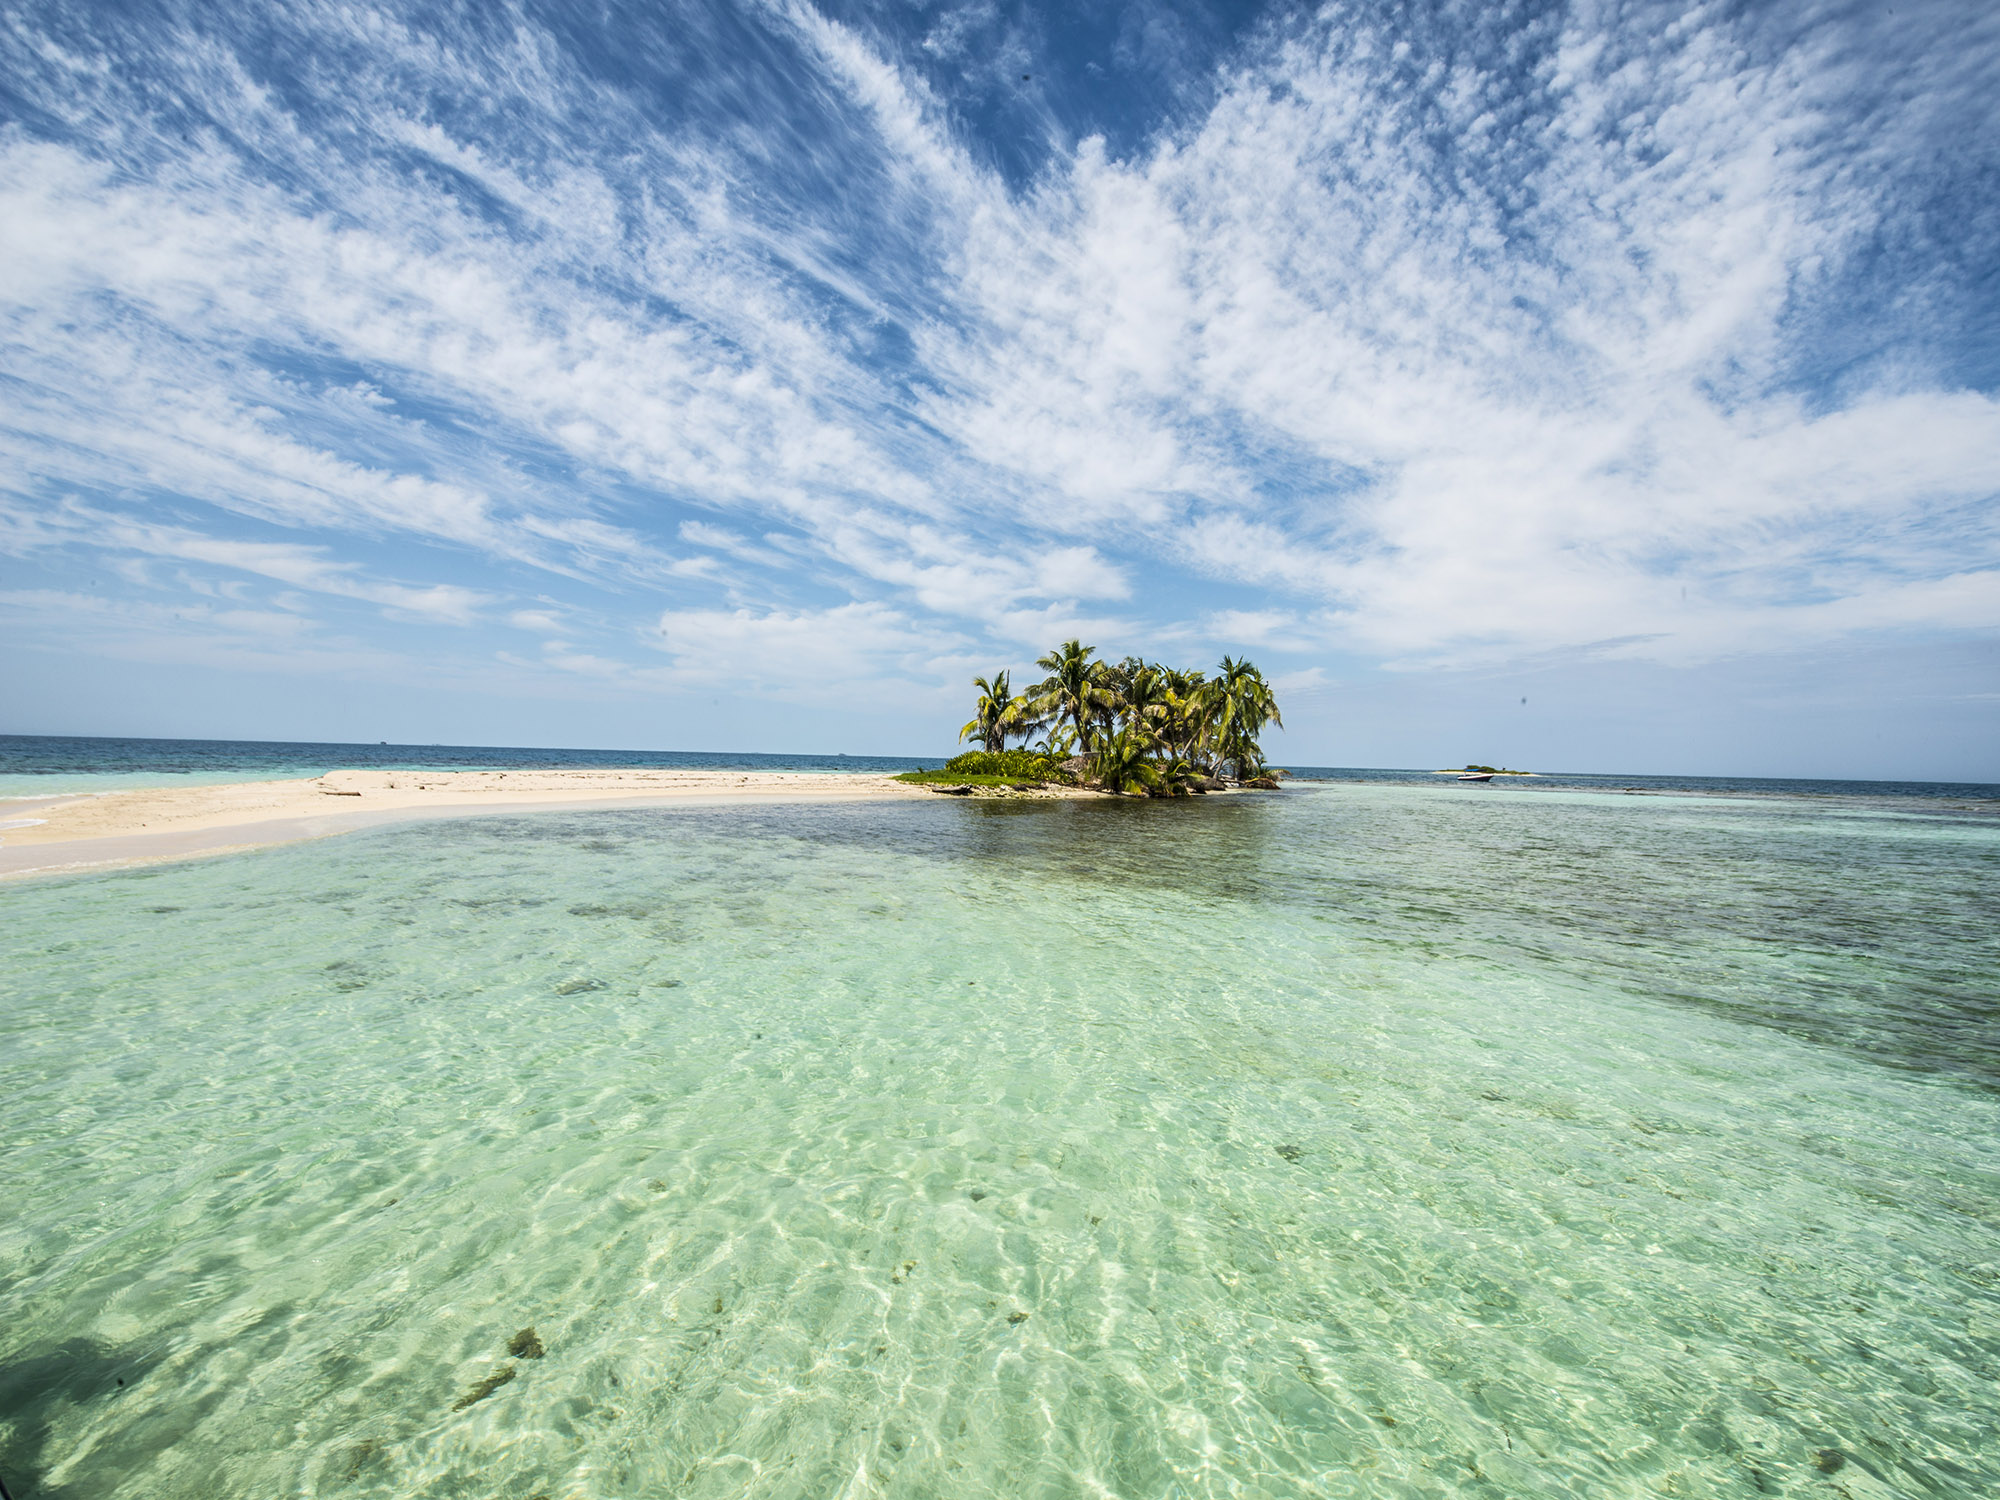 Silk cayes Belize's most popular photography spots according to Instagram